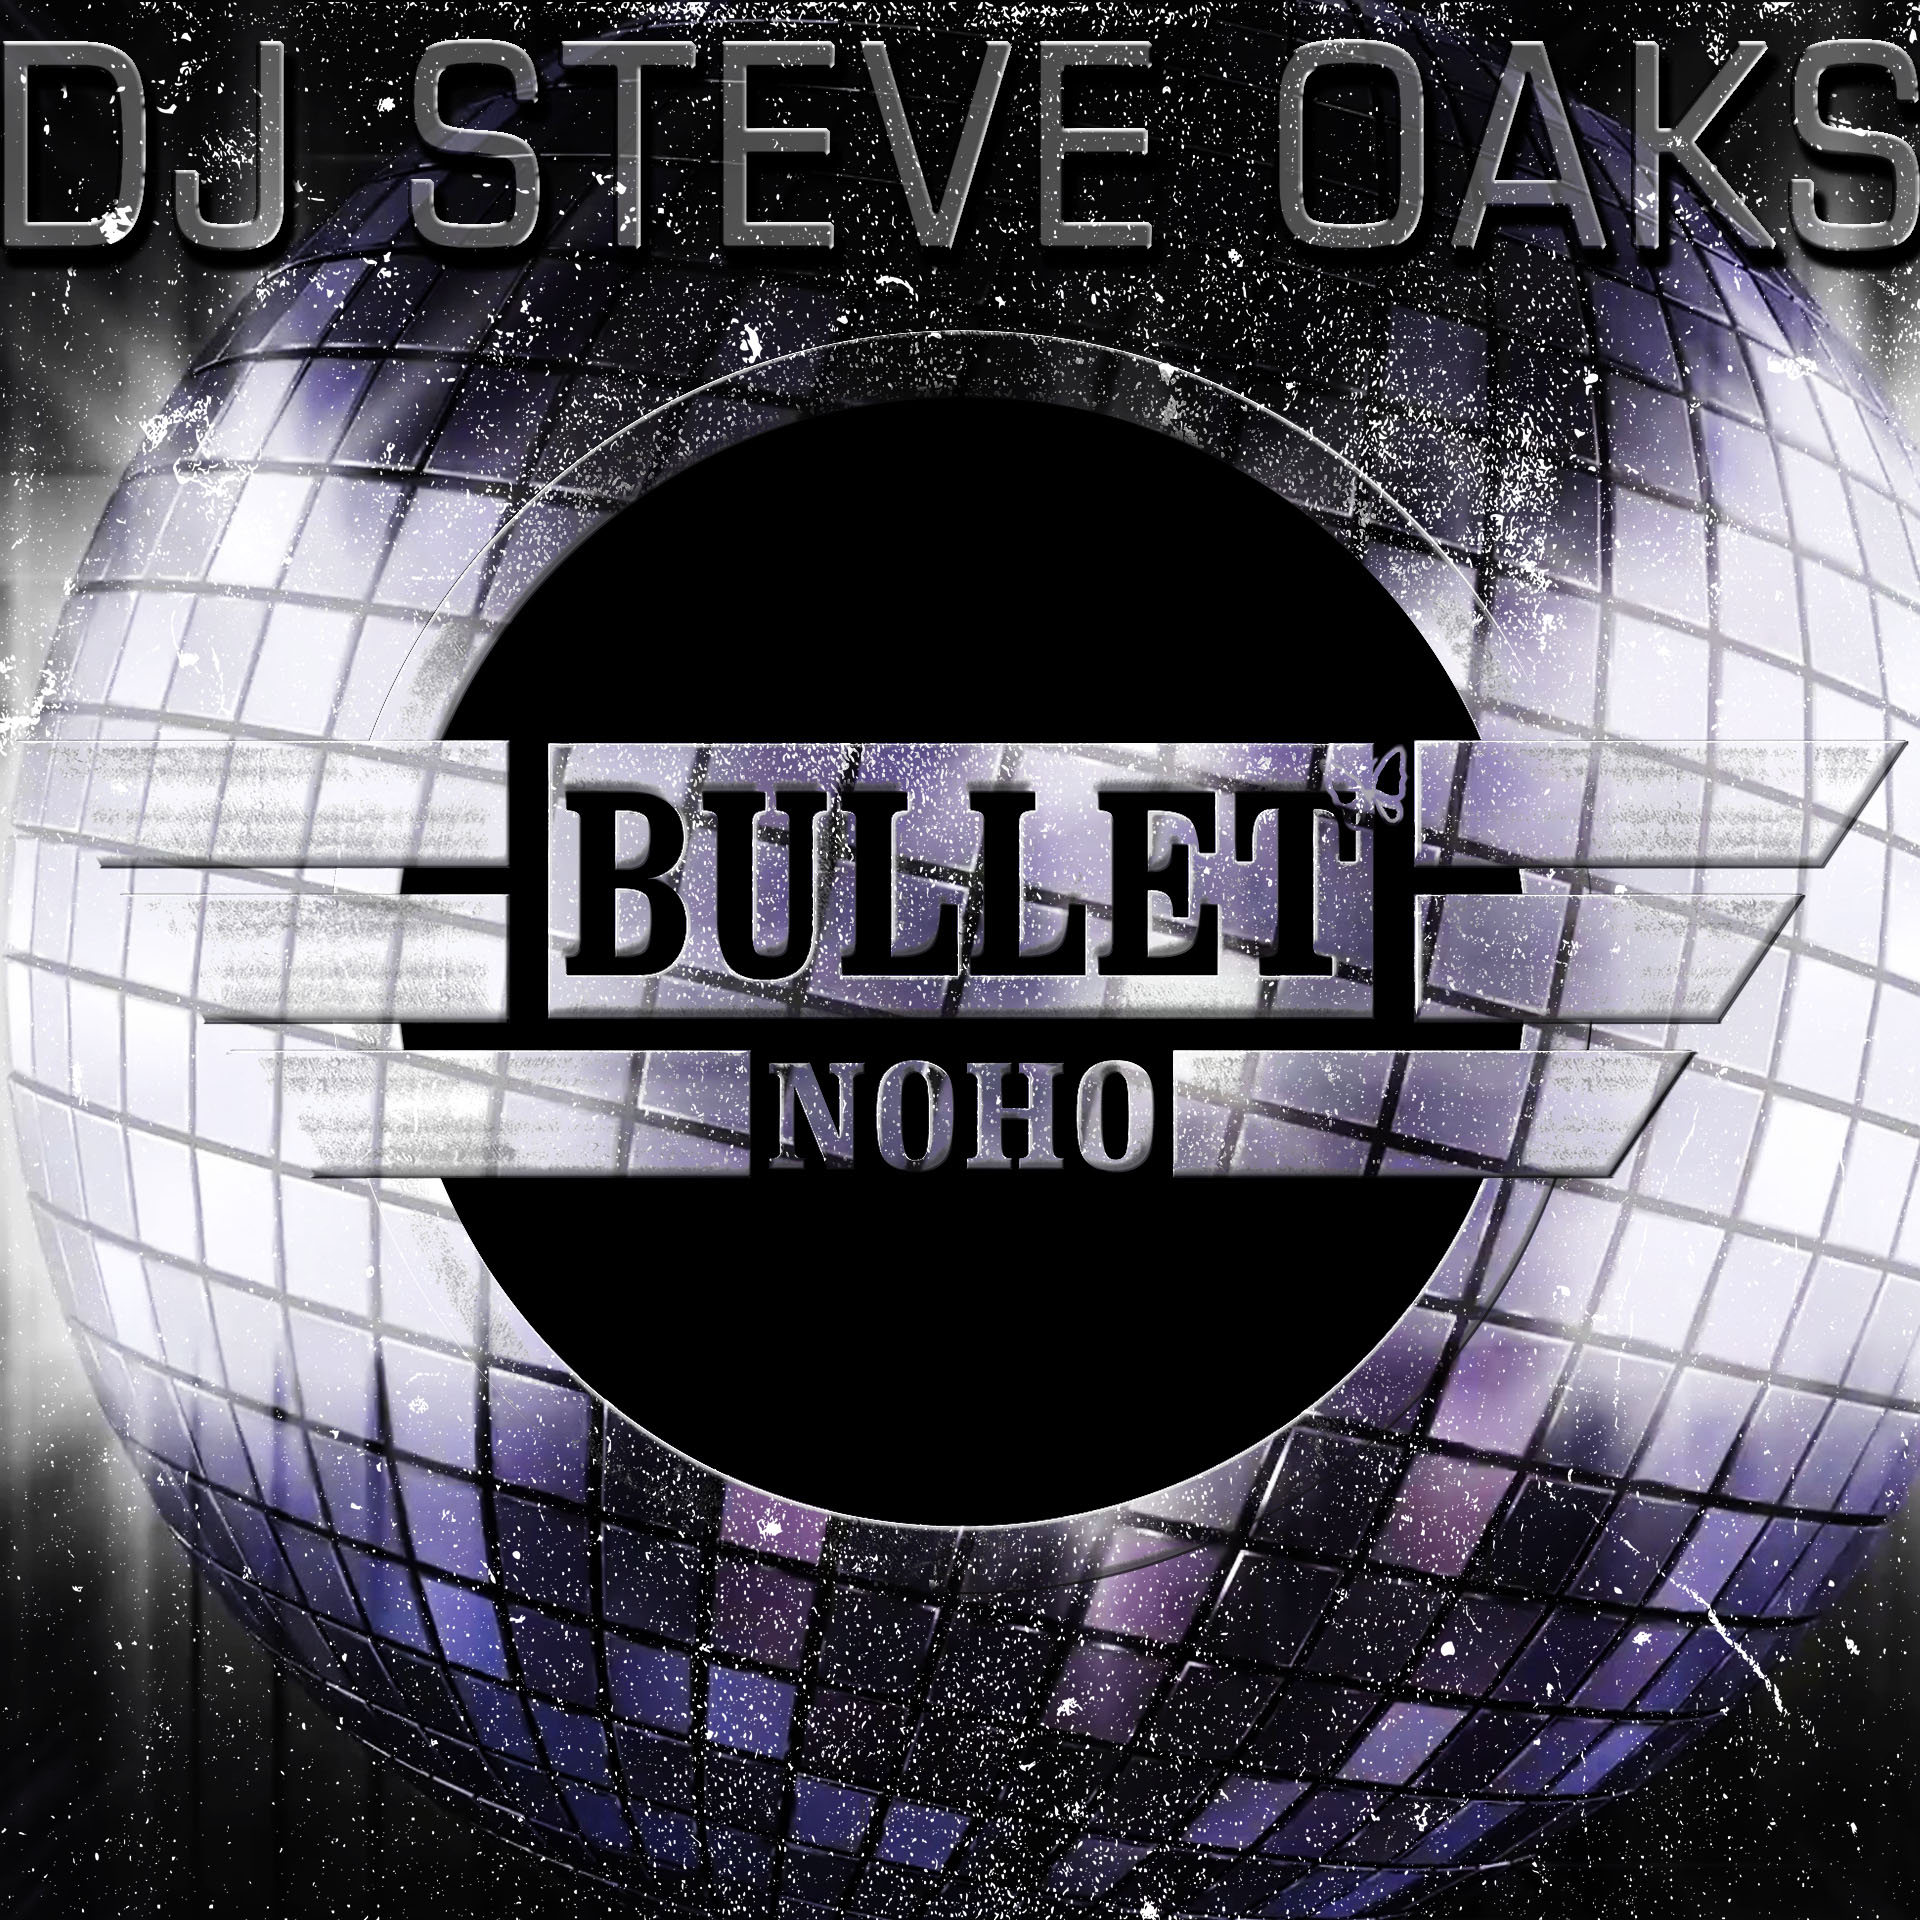 DJ STEVE OAKS: Sunday, 03/03/24 from 3:00 PM to 8:00 PM